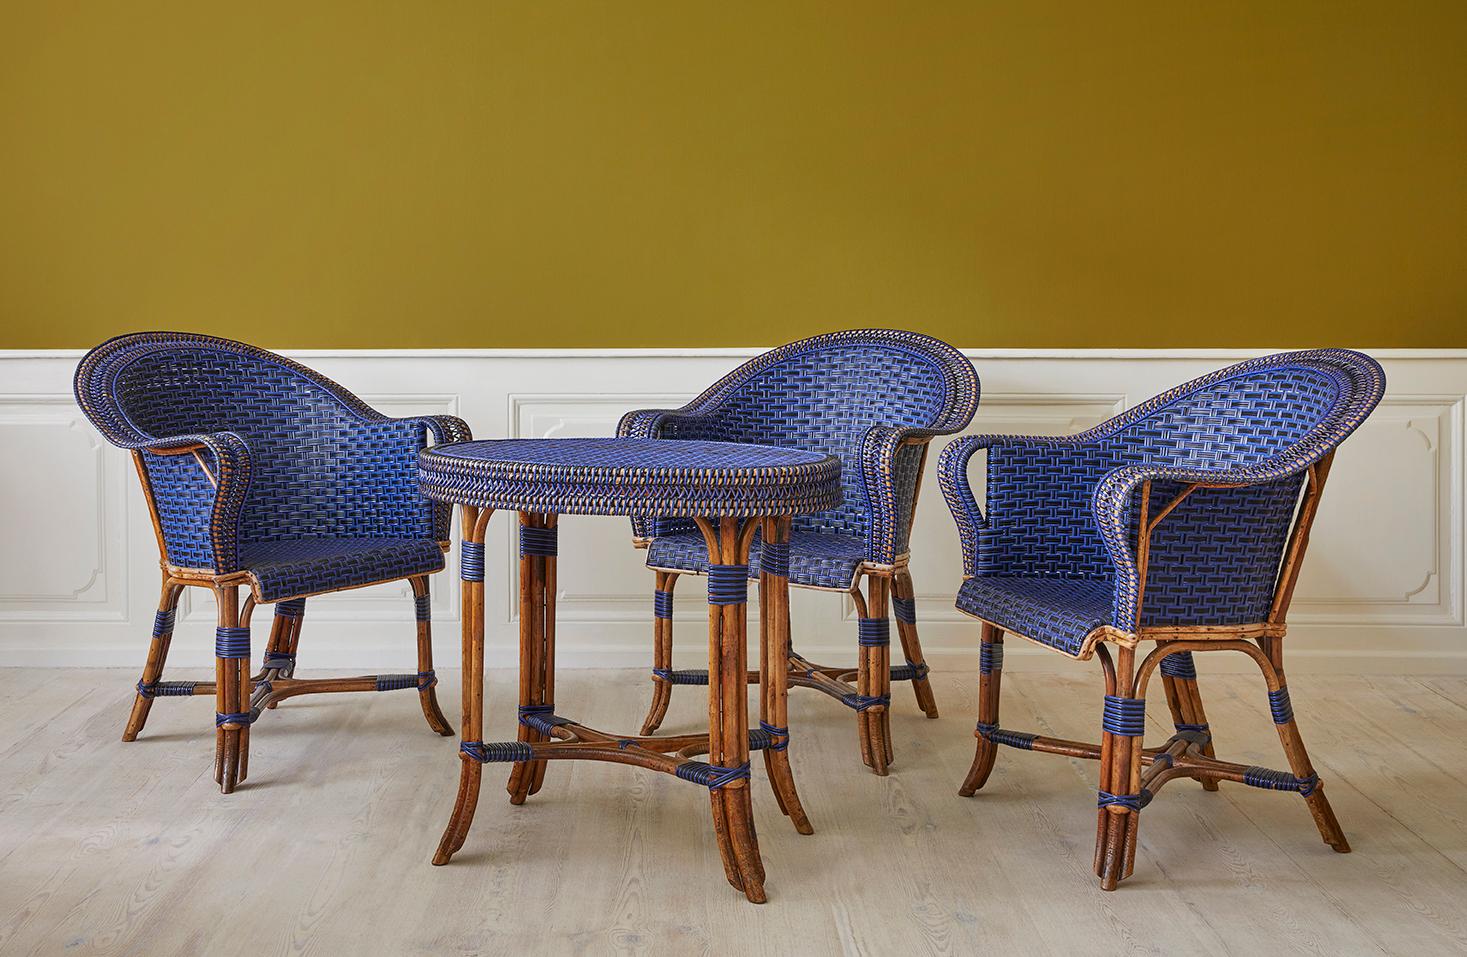 France, early 20th Century

Ensemble in blue and black rattan. Three armchairs and an oval table.

Table L 75 x W 55 x H 70 cm

Chair W 71 x D 62 x H 89 cm